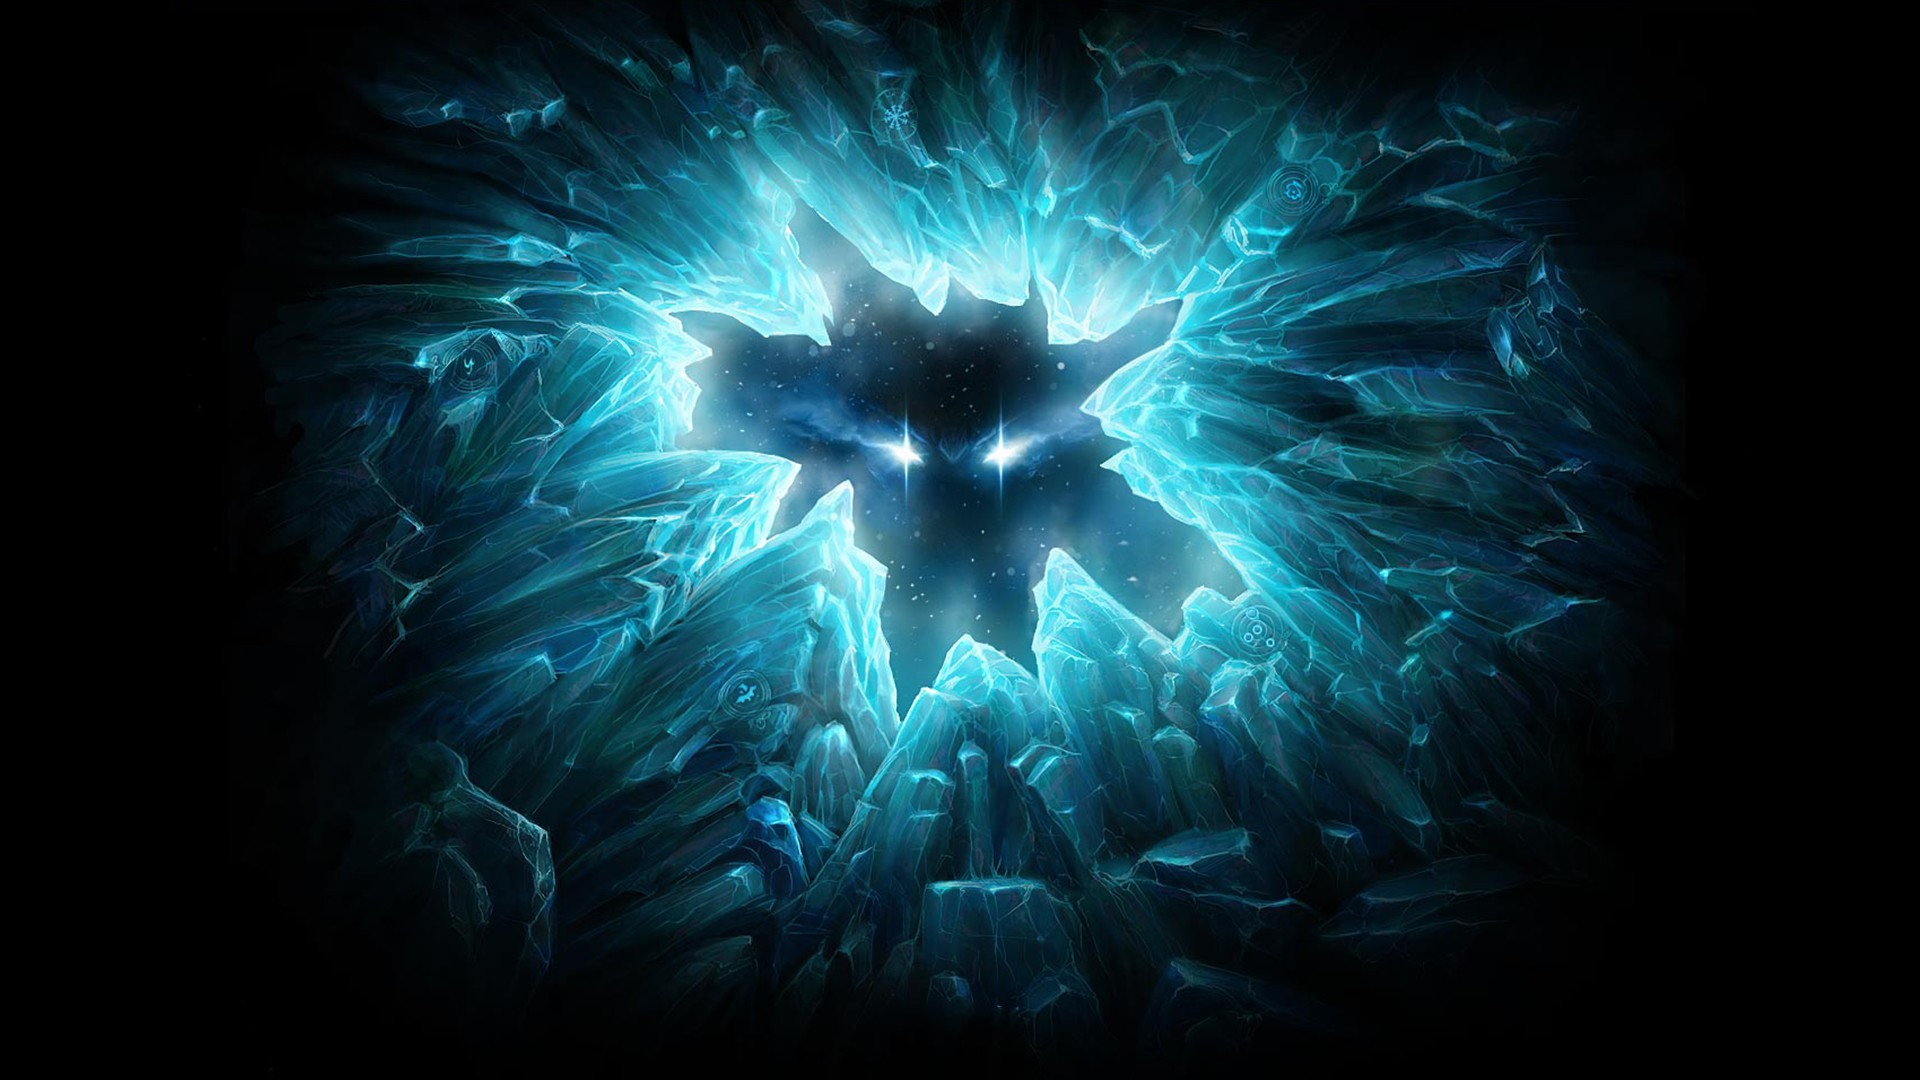 World of Warcraft   Wrath of the Lich King wallpaper   1034210